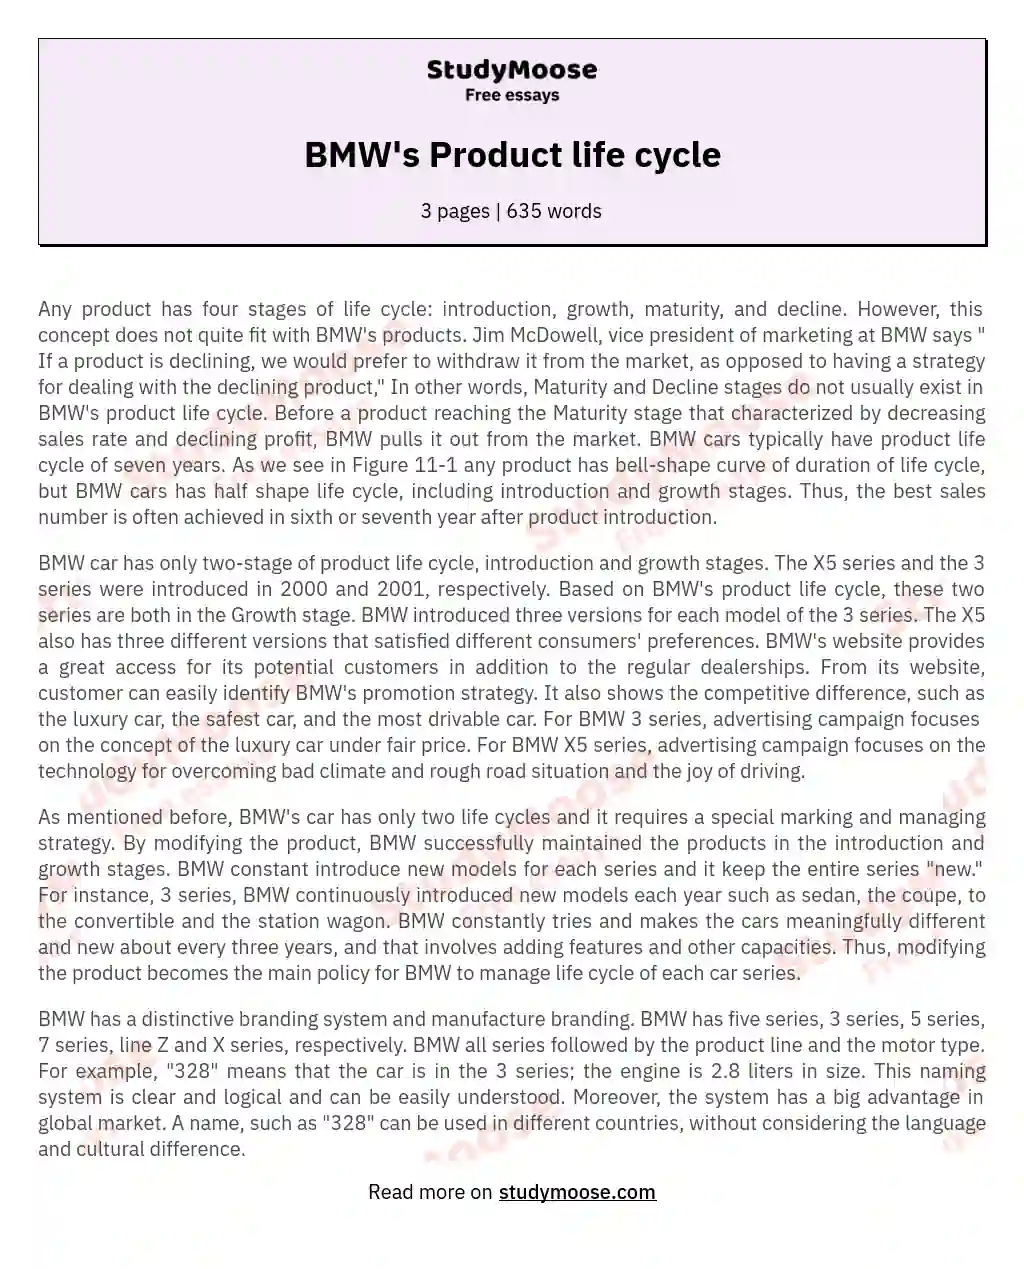 BMW's Product life cycle